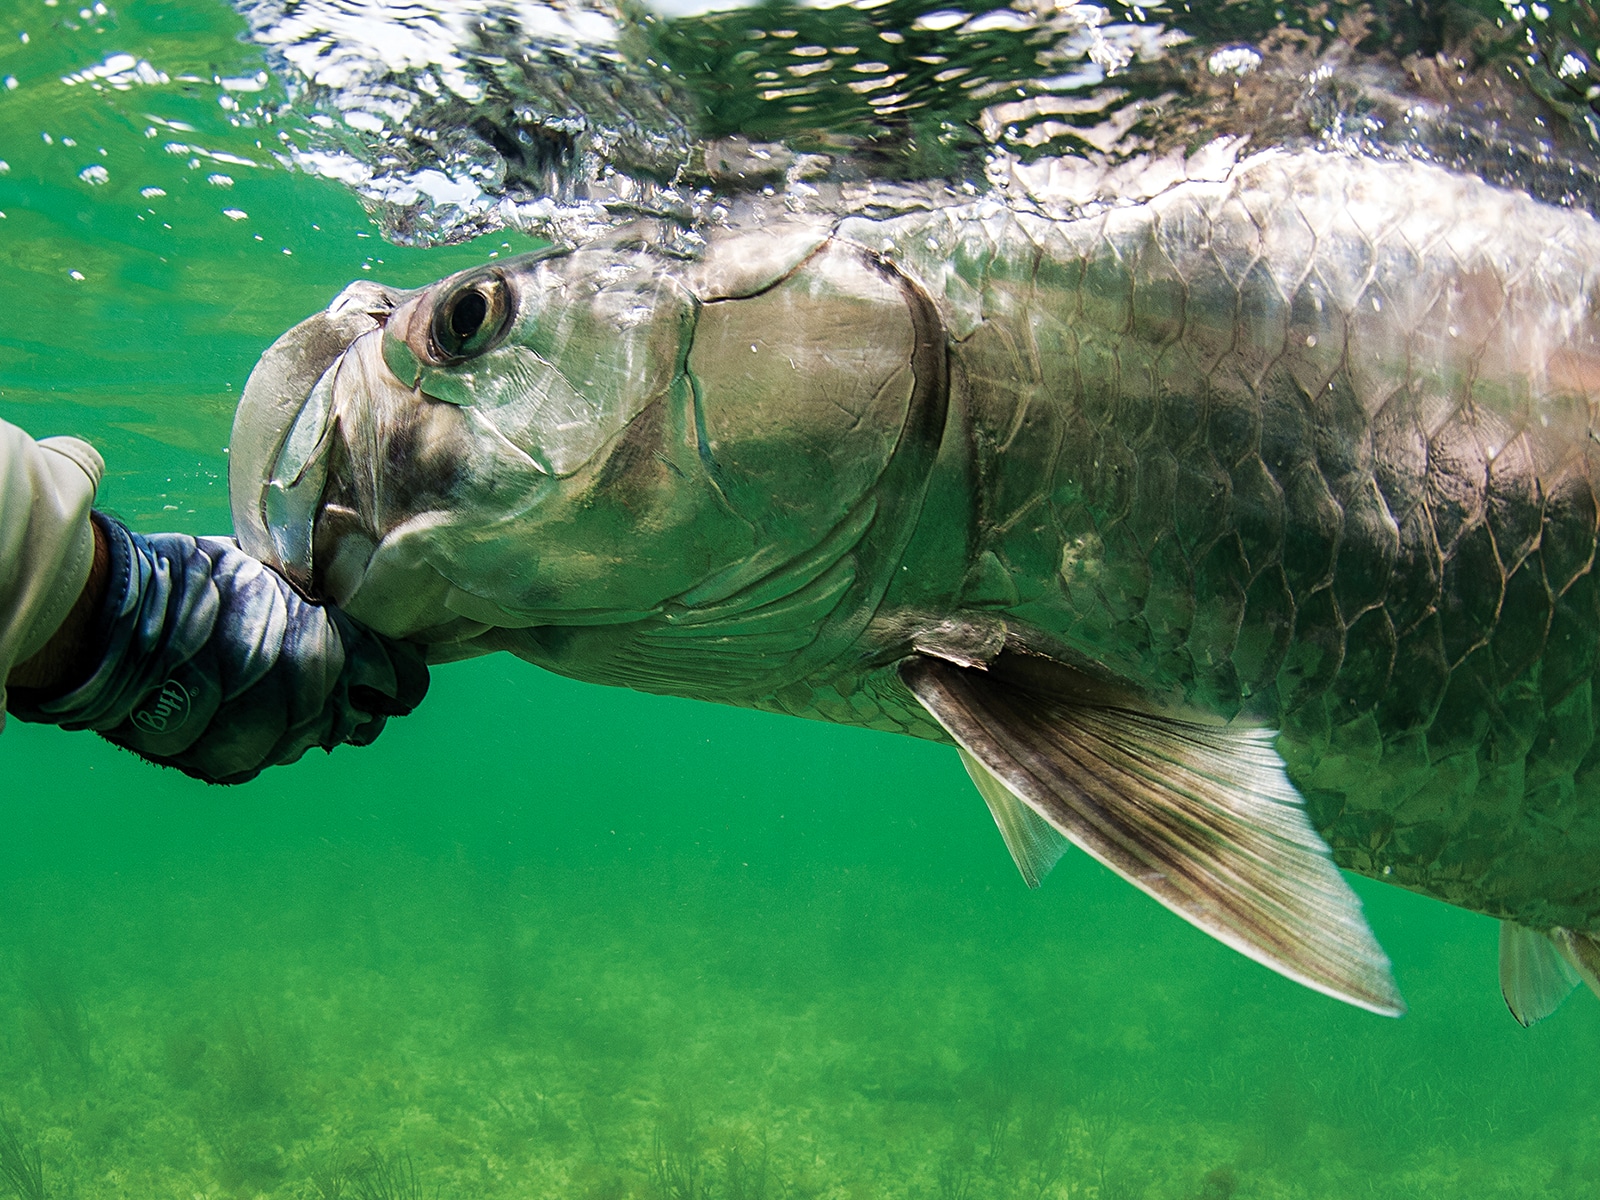 Saltwater Game Fishing: 9 Fish Every Offshore Angler Should Catch